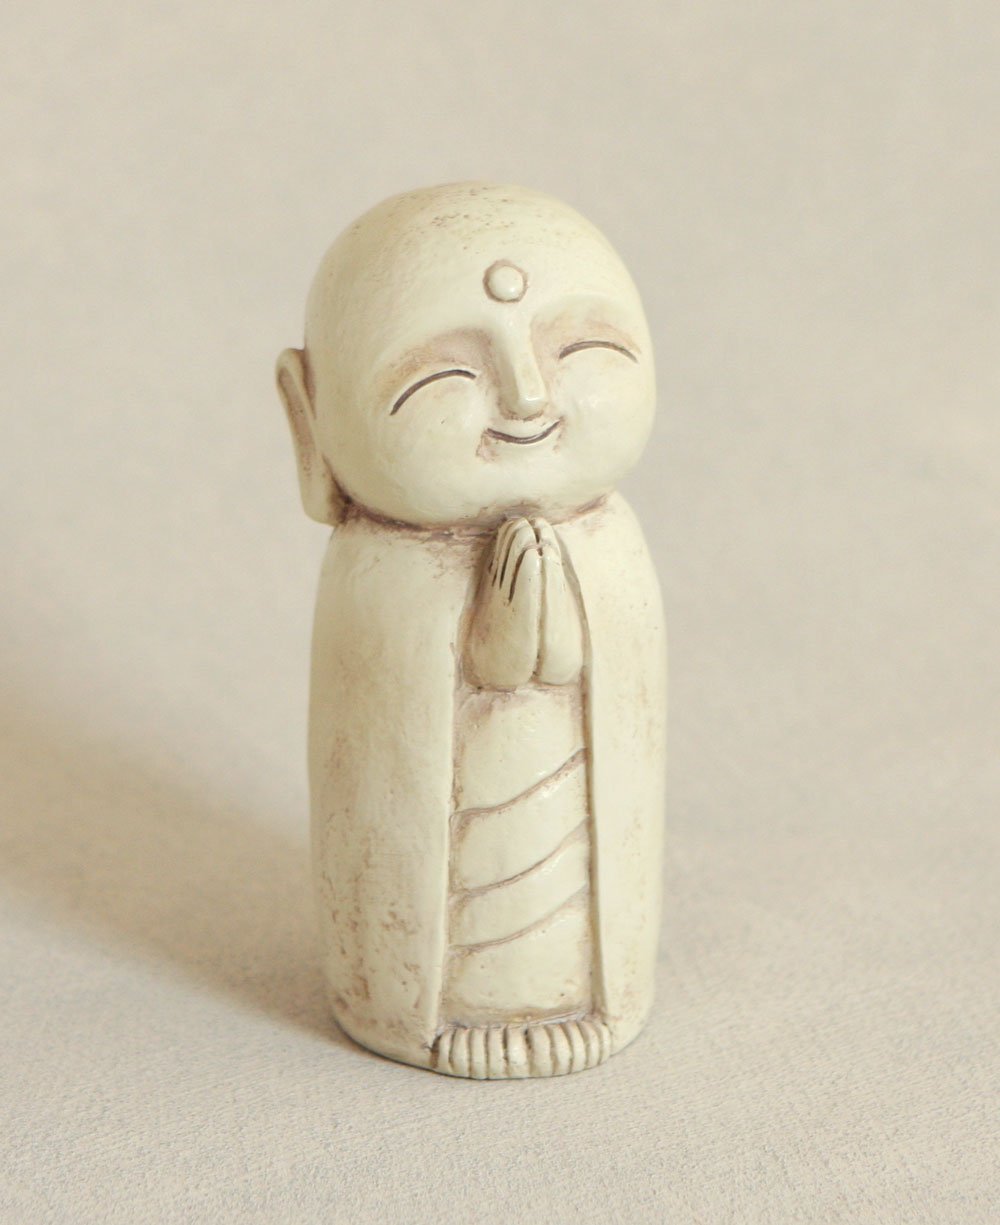 Healing and Calming Jizo Monk Statue, 5 Inches - Sculptures & Statues